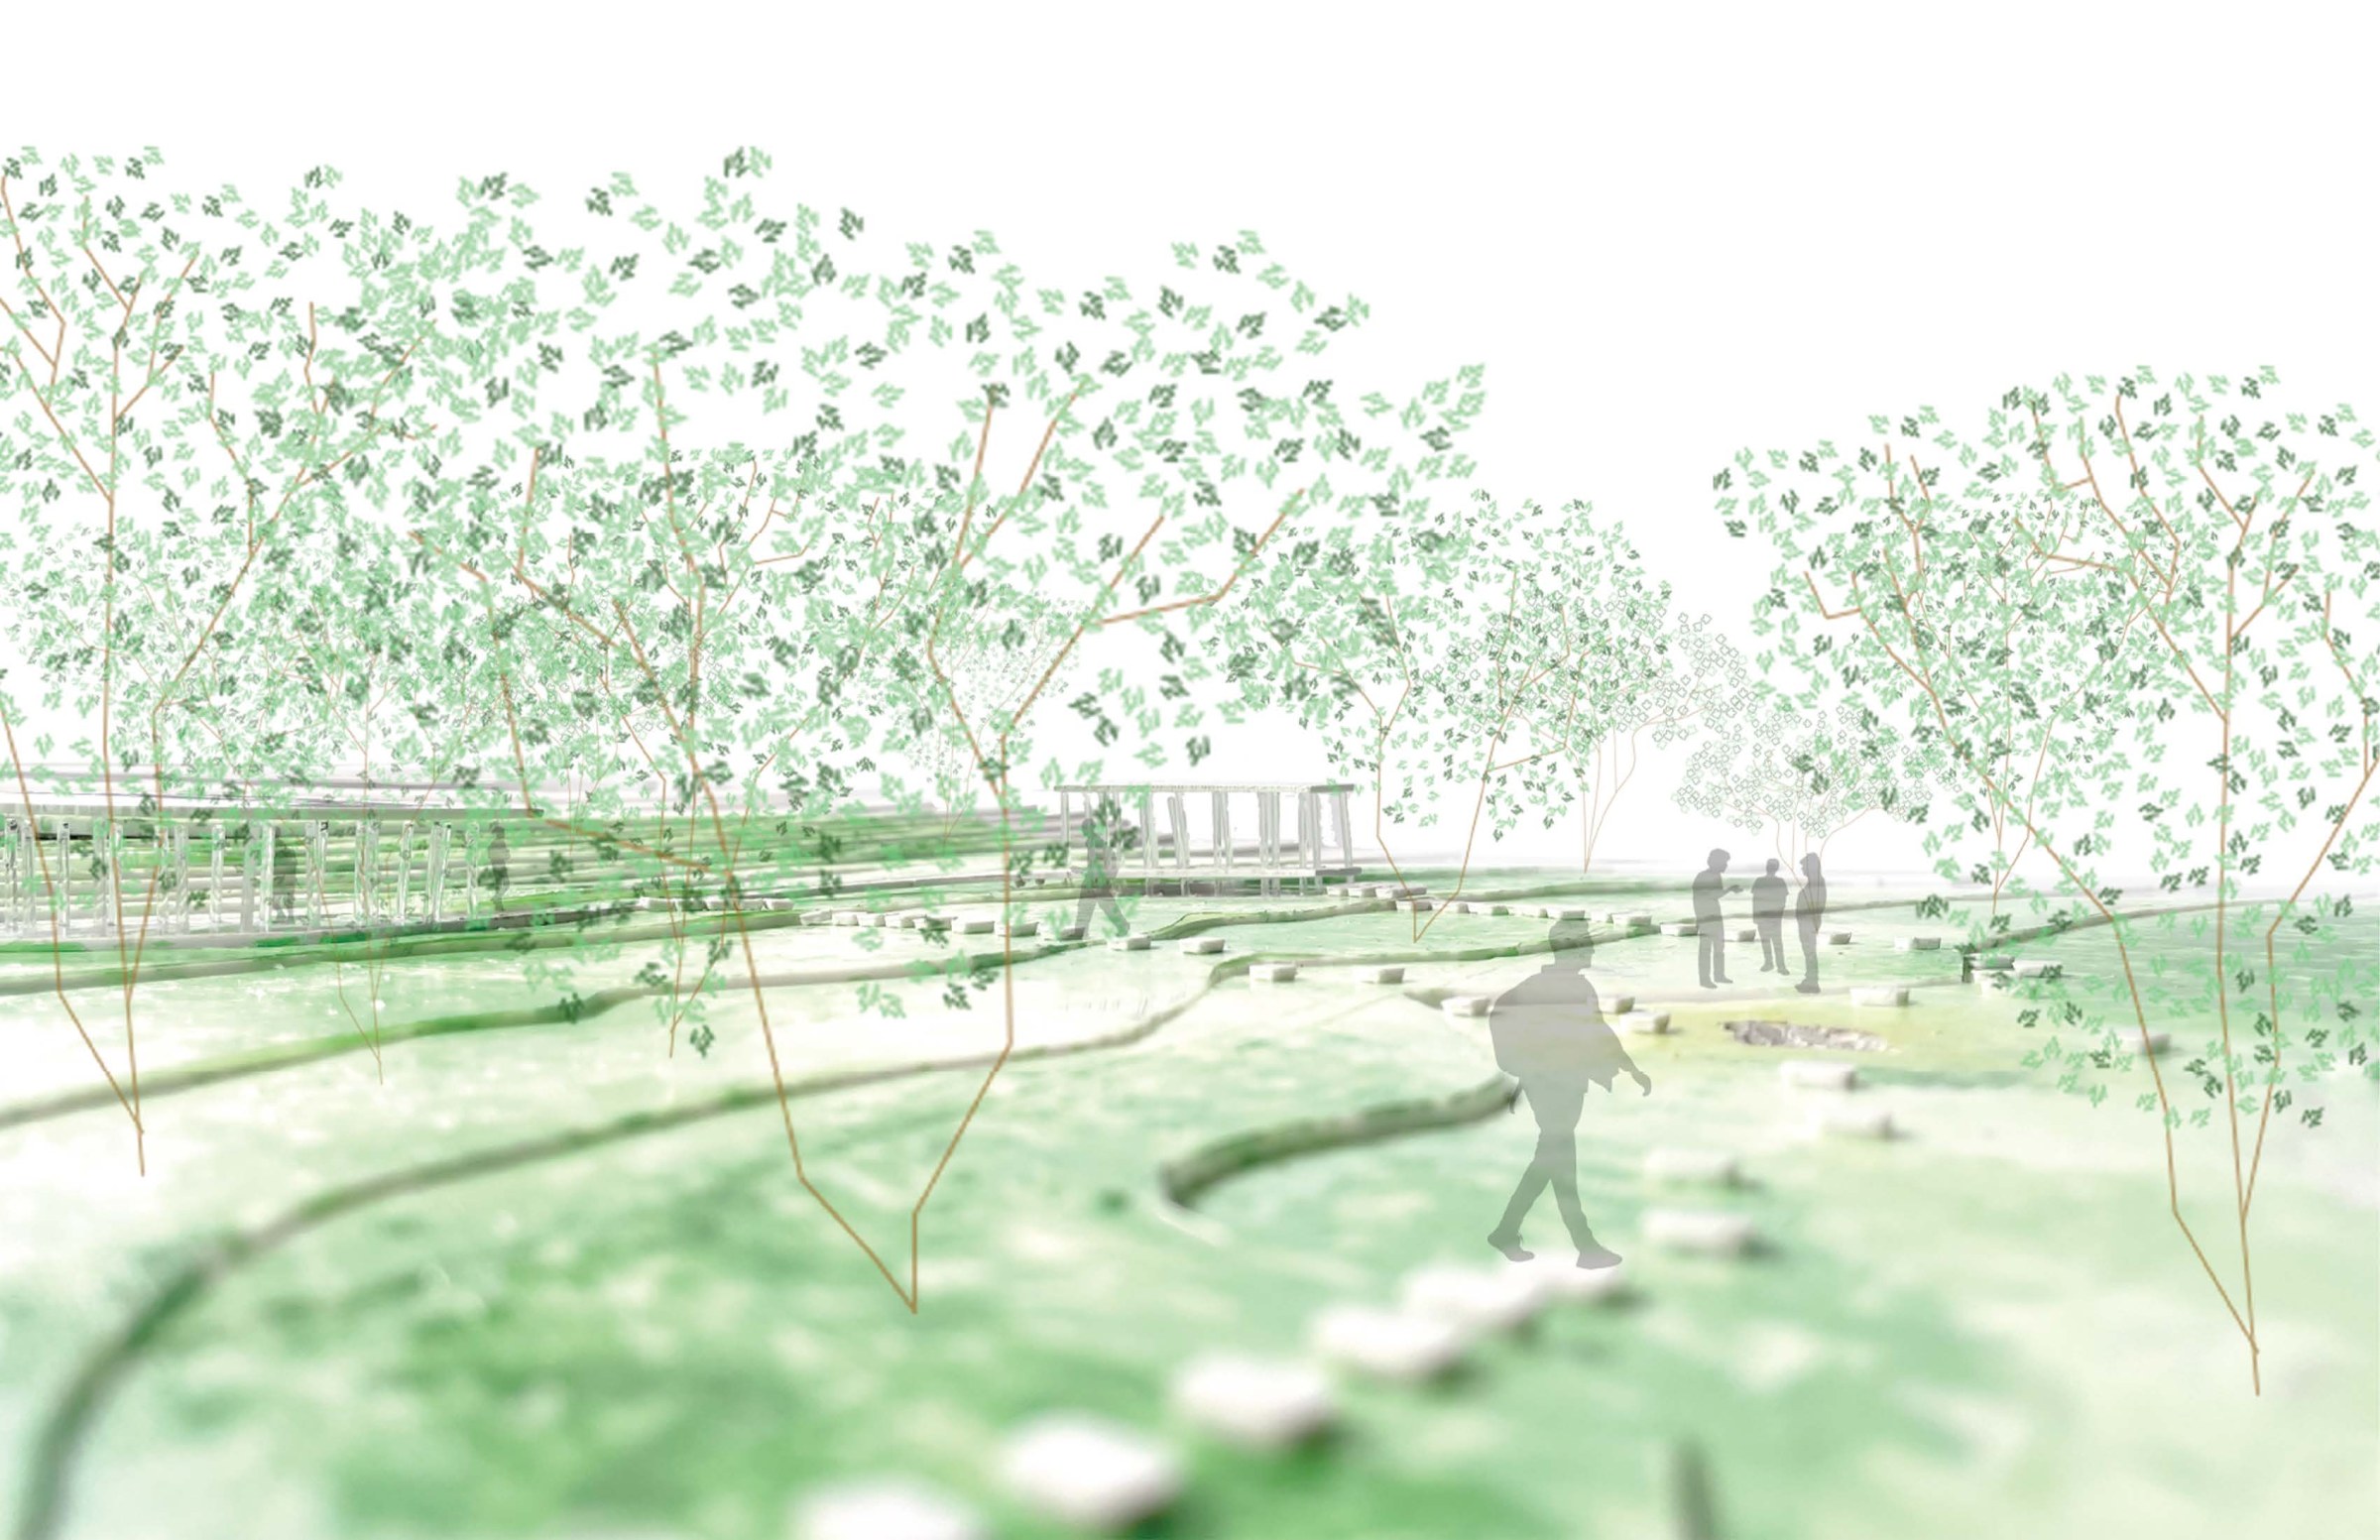 Malina Pickard's thesis project render of outdoor space